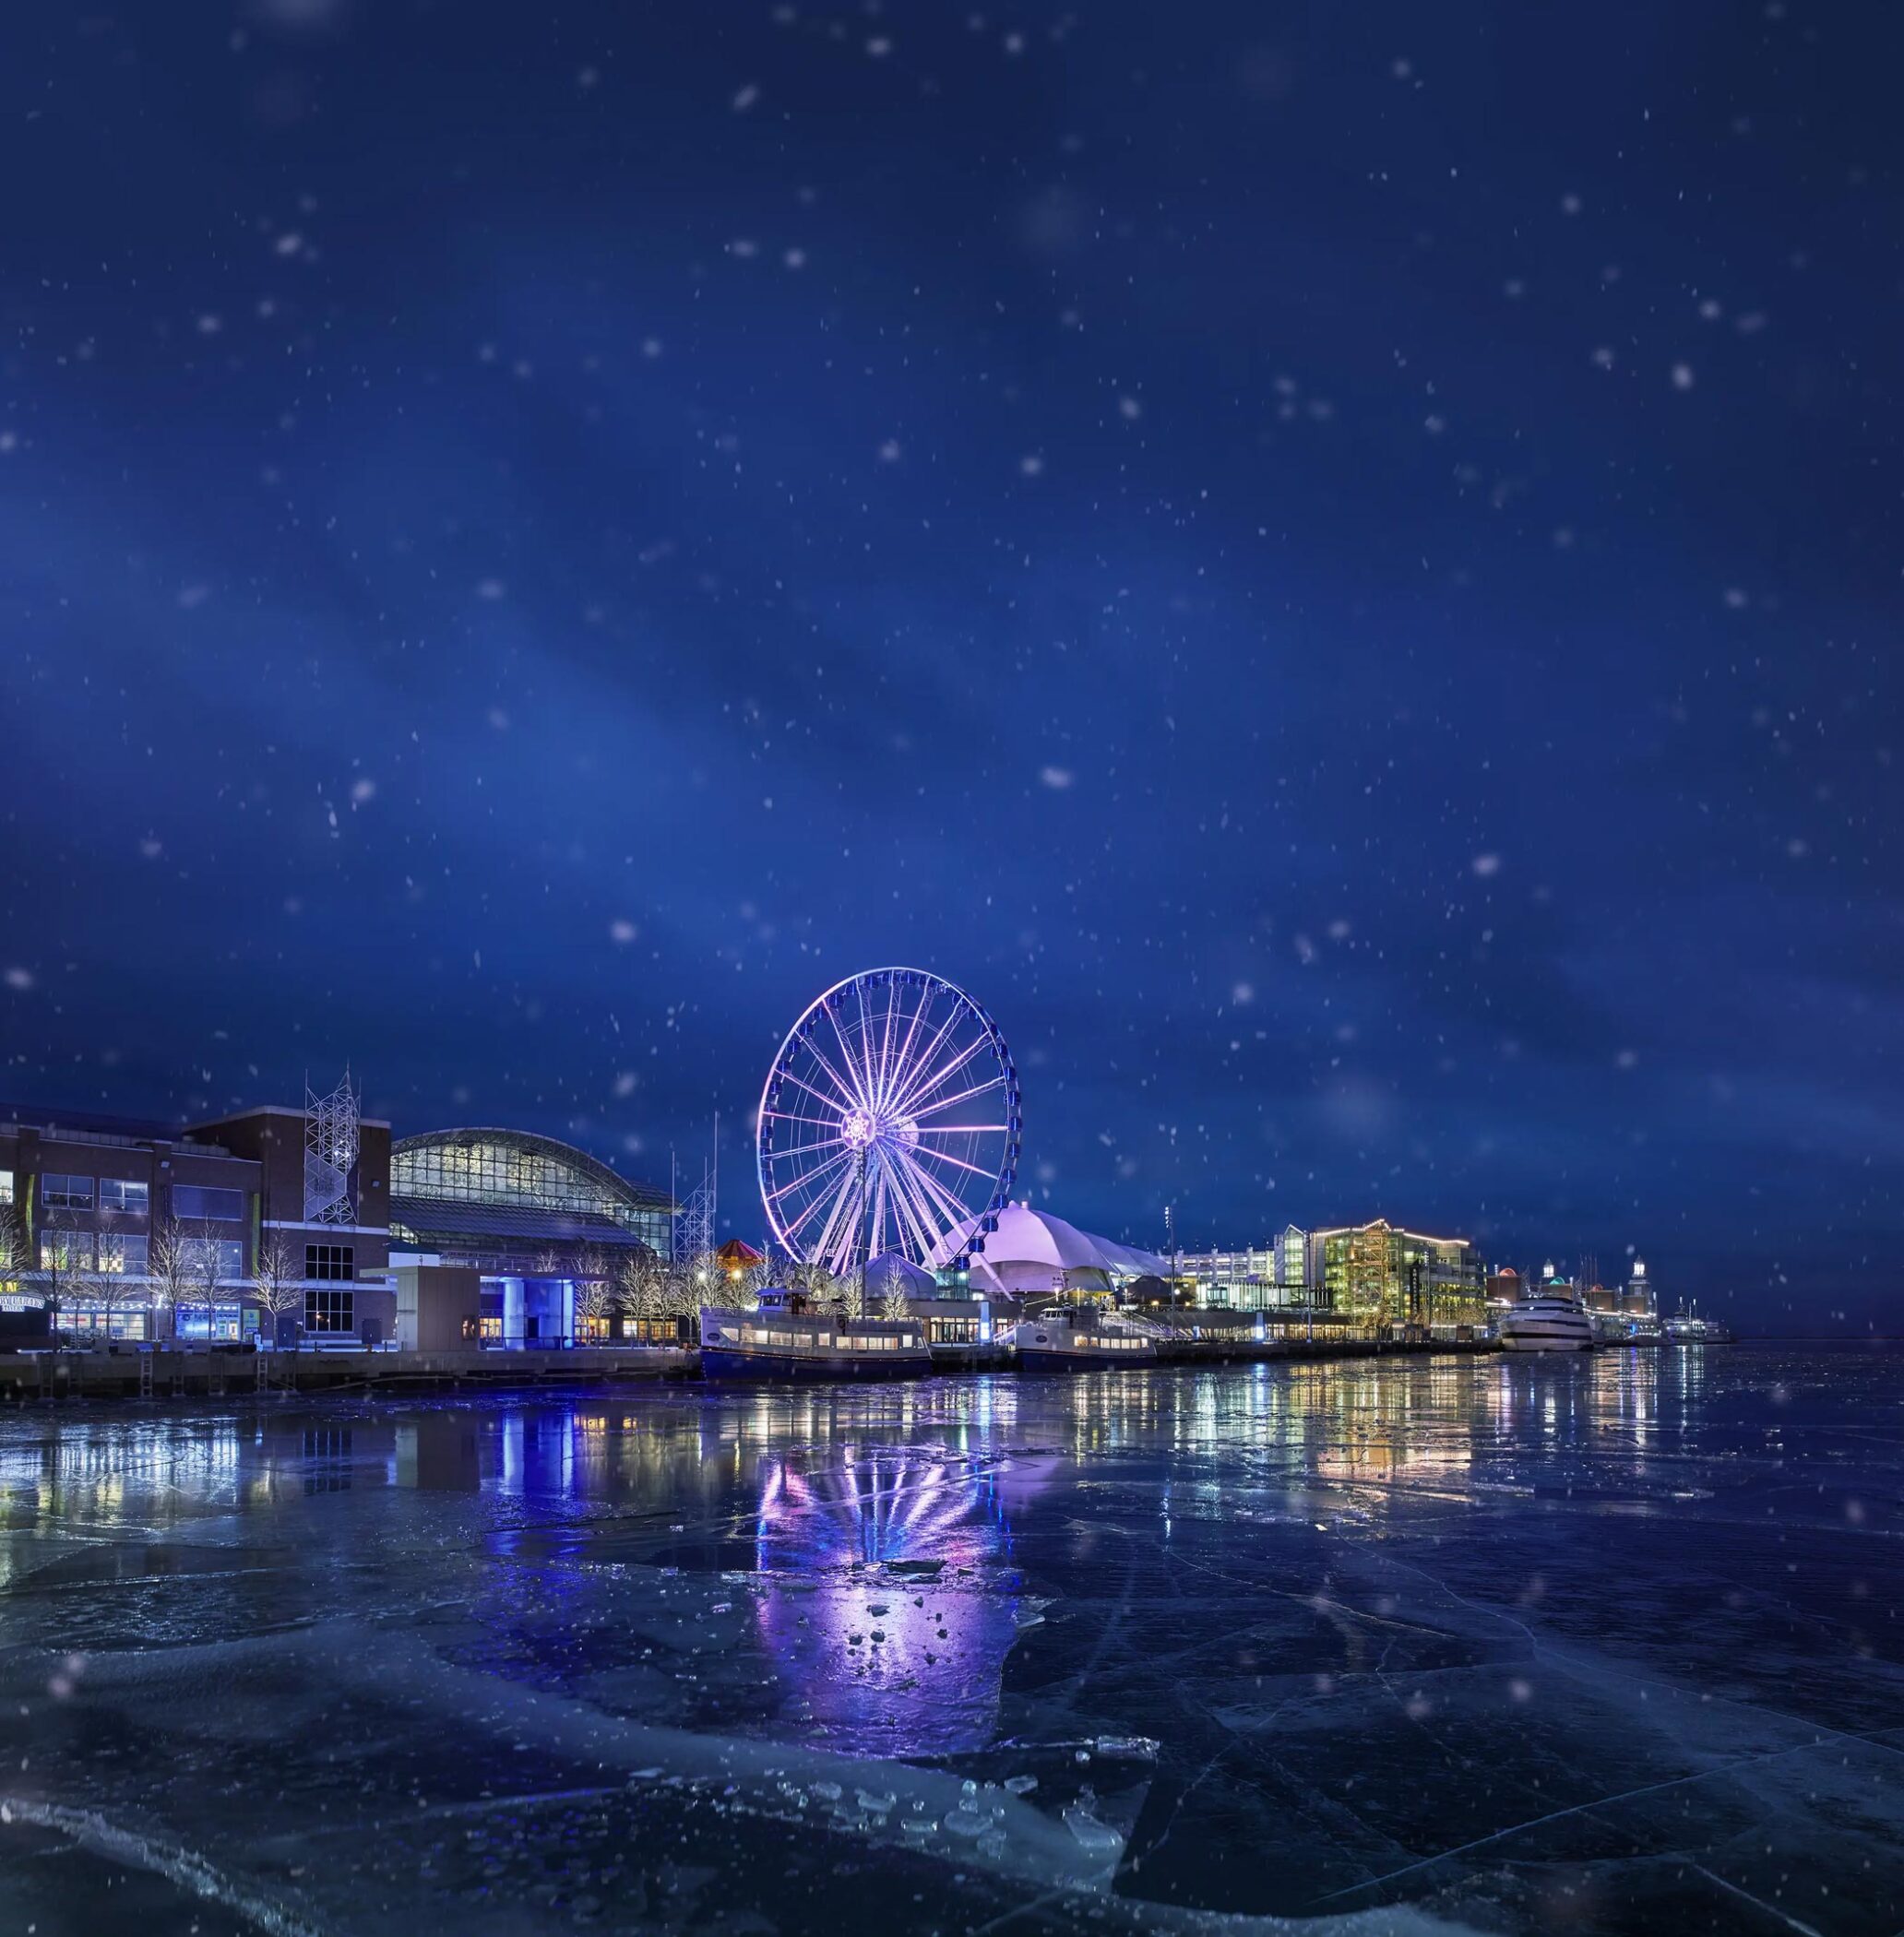 Immersive Experiences, Cultural Celebrations, and Family Festivities on Deck for Winter 2023 at Navy Pier